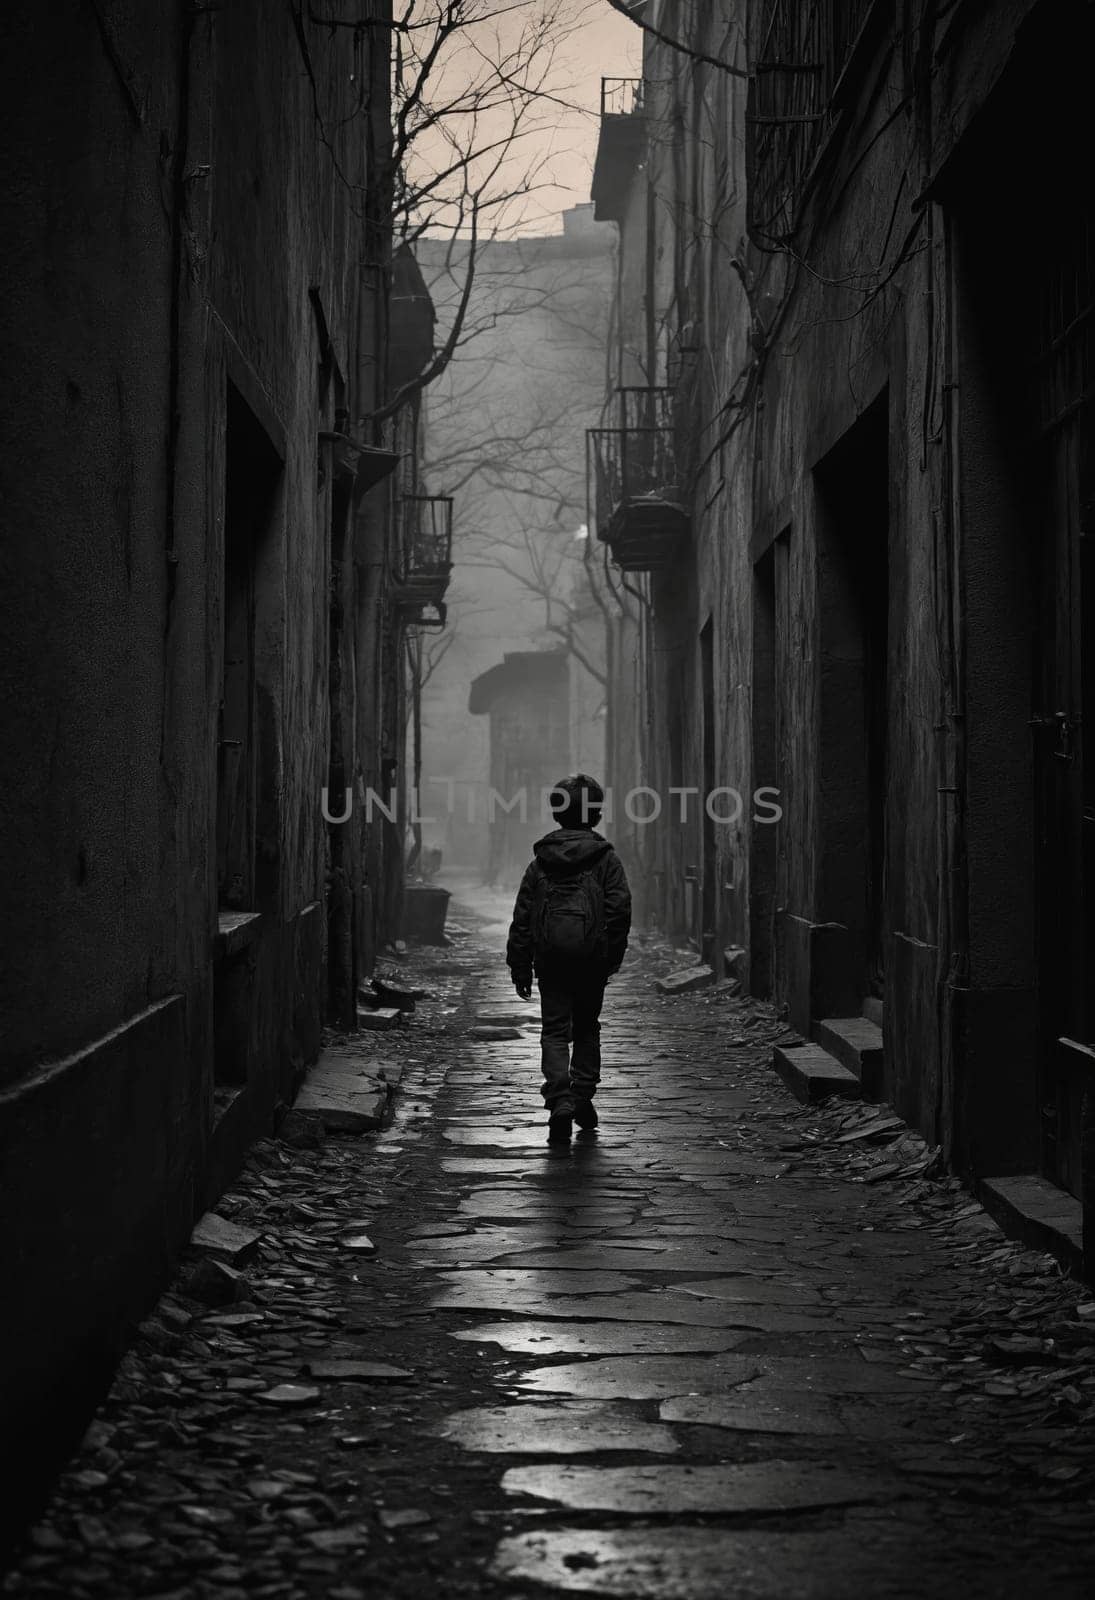 A boy is walking down a dark alley at midnight in a blackandwhite photo. The flash photography illuminates the road surface and creates contrasting tints and shades